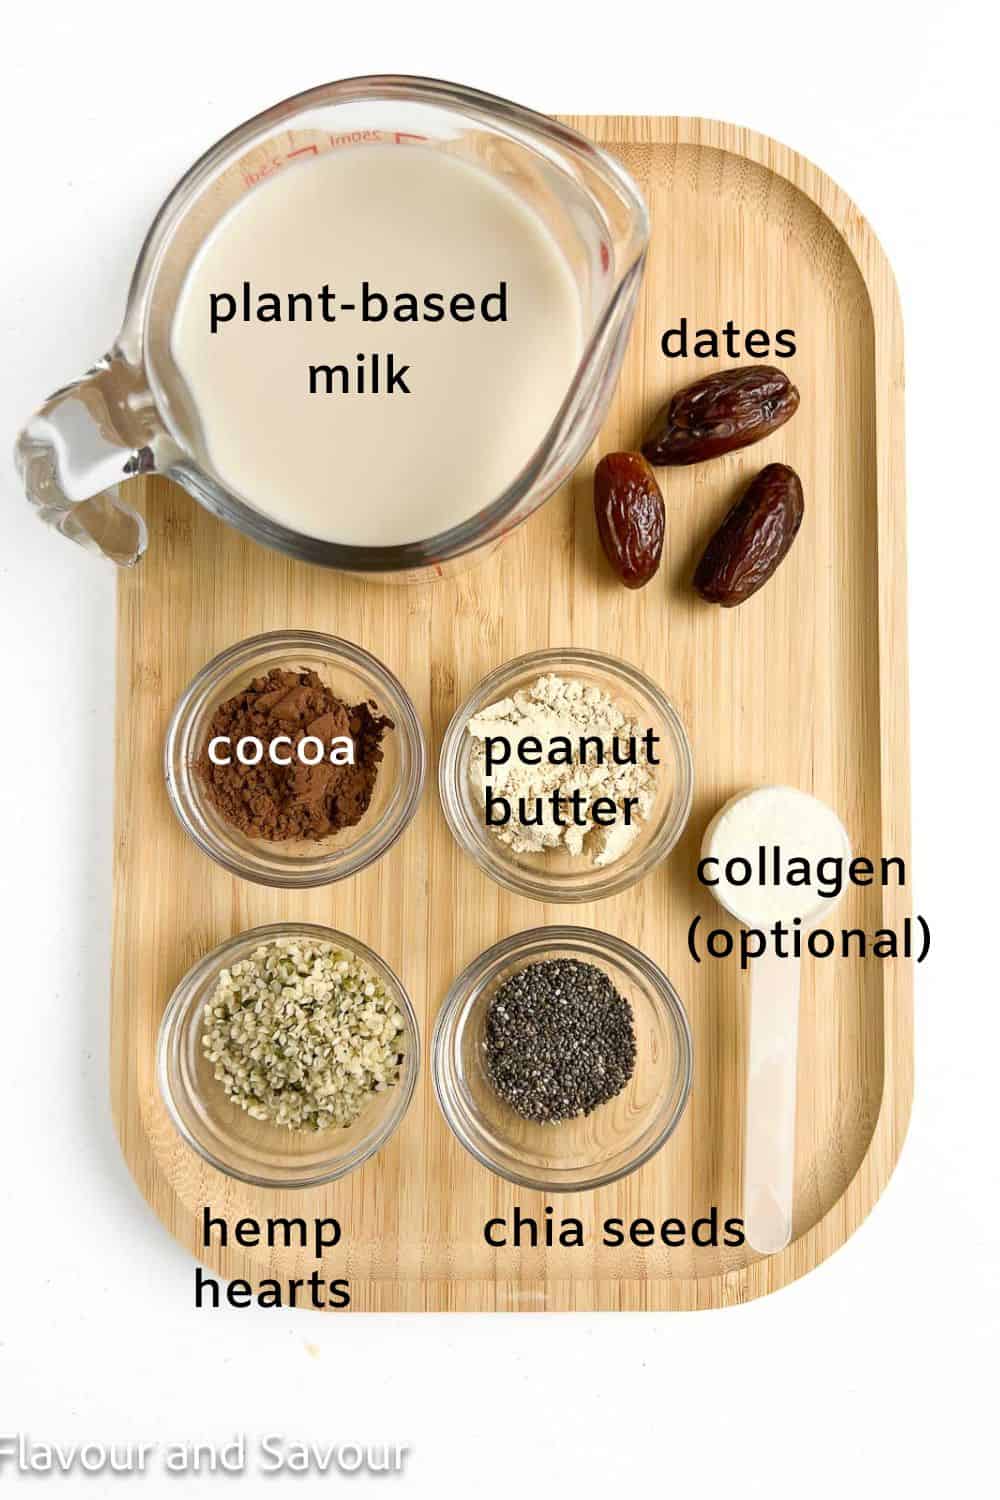 Labelled ingredients for chocolate peanut butter smoothie: plant-based milk, cocoa, peanut butter, hemp hearts, chia seeds, collagen powder (optional)